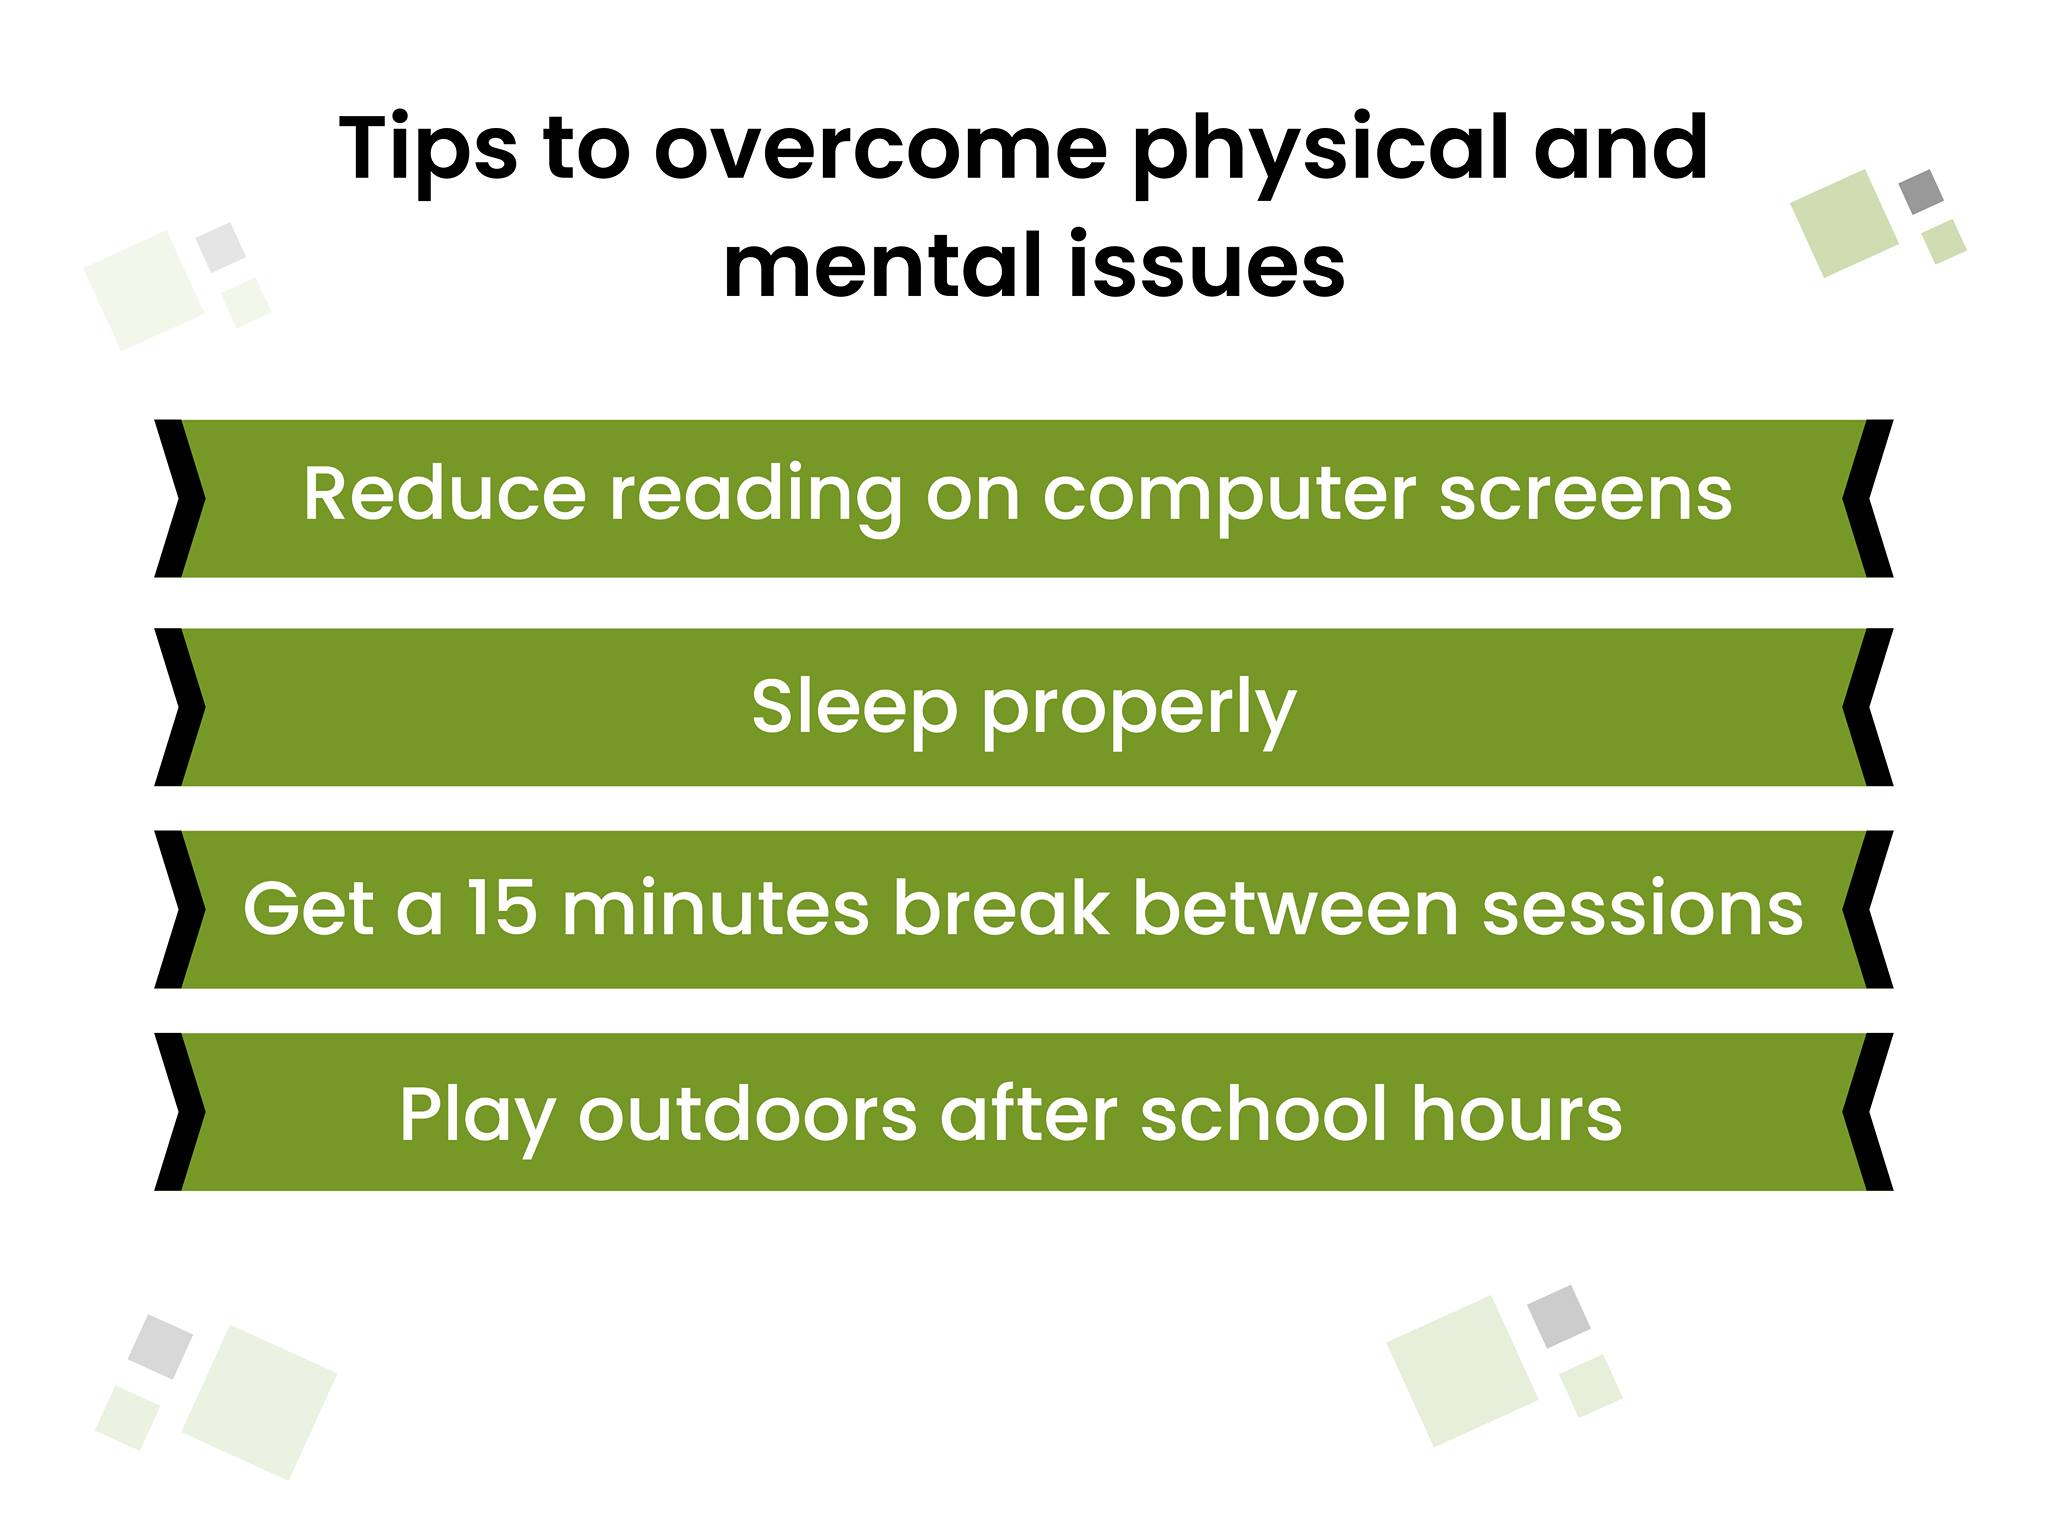 Tips to overcome physical and mental issues